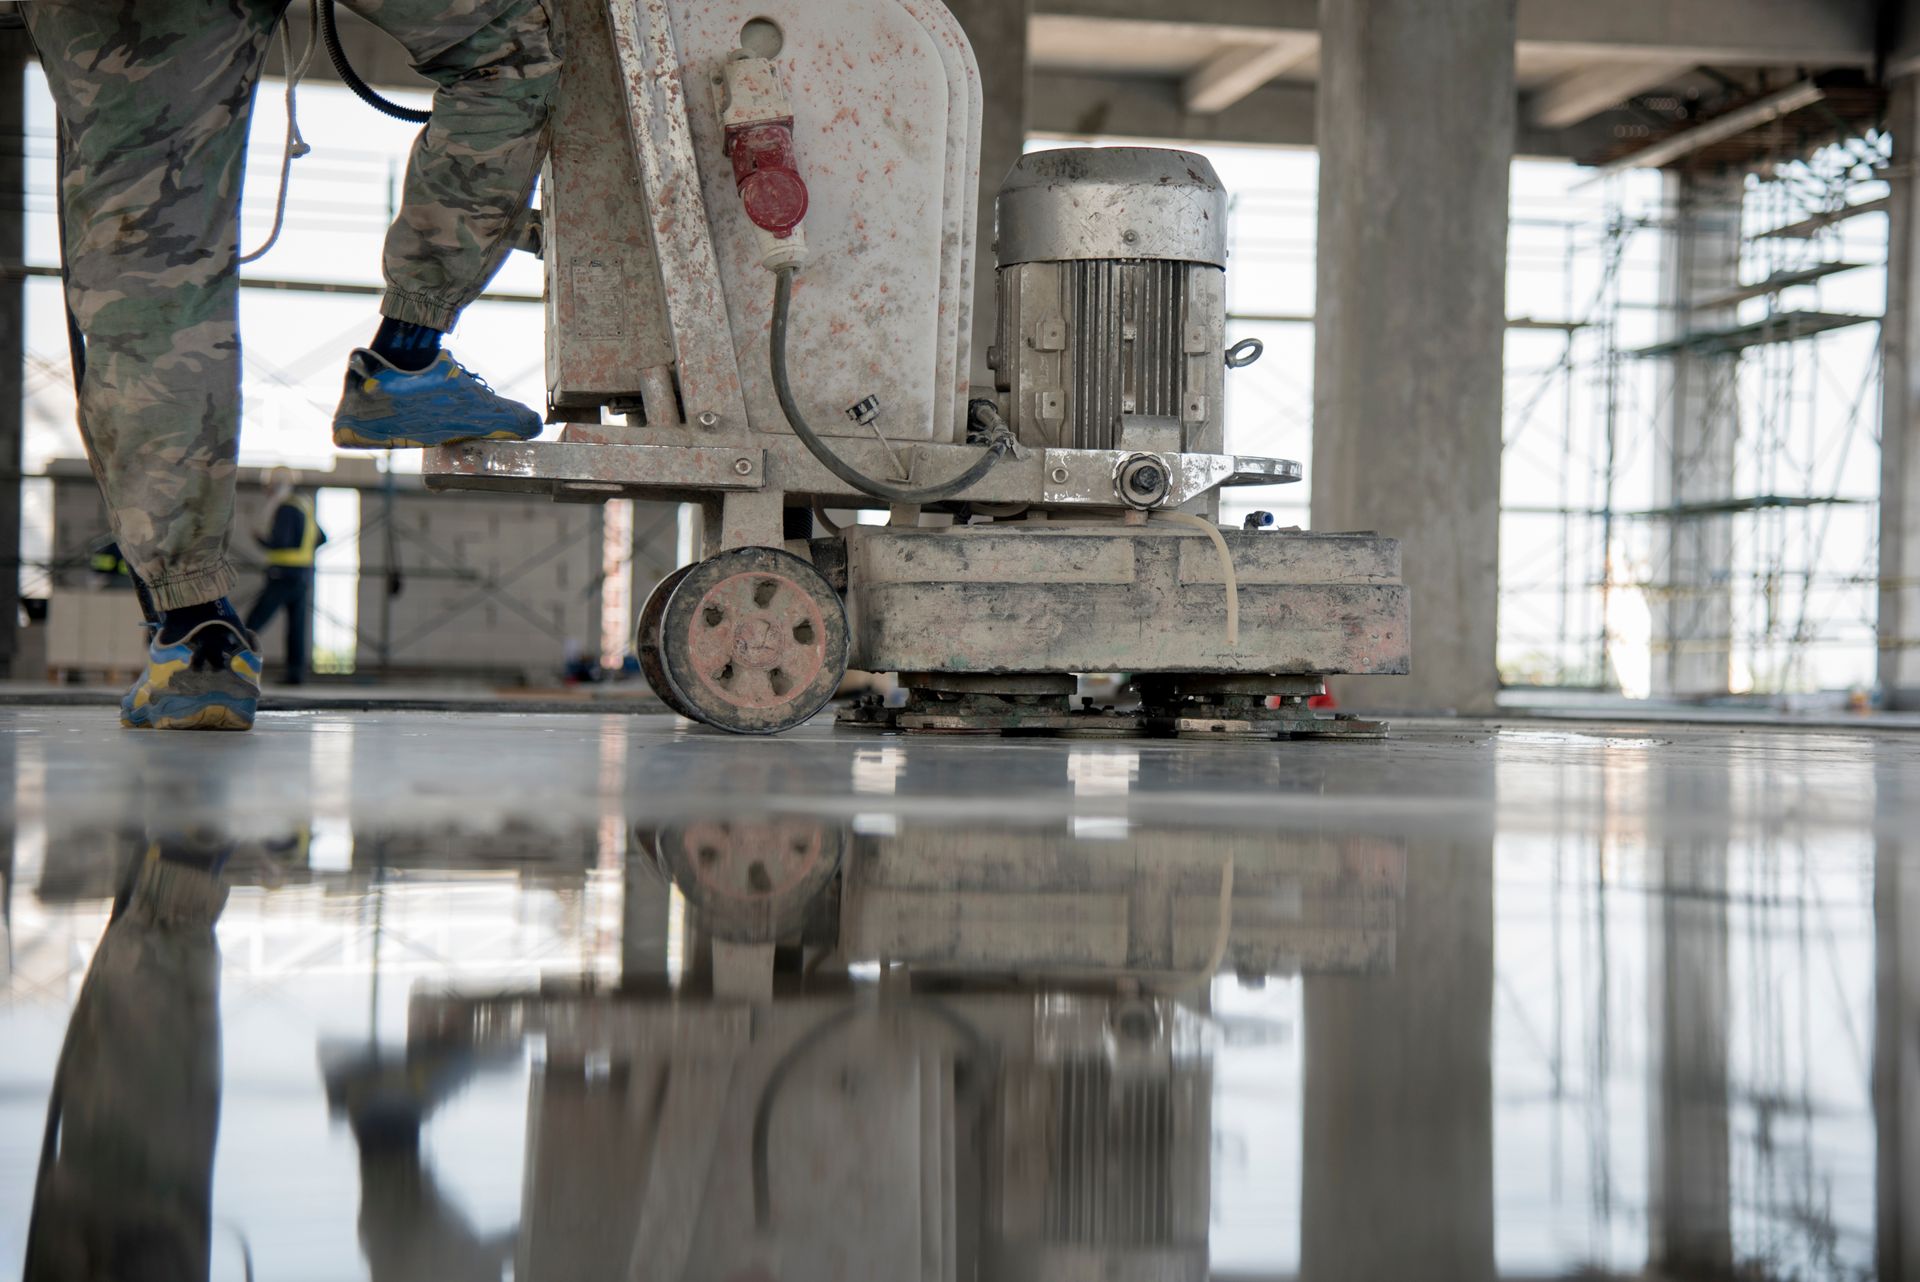 A man is polishing a concrete floor with a machine.